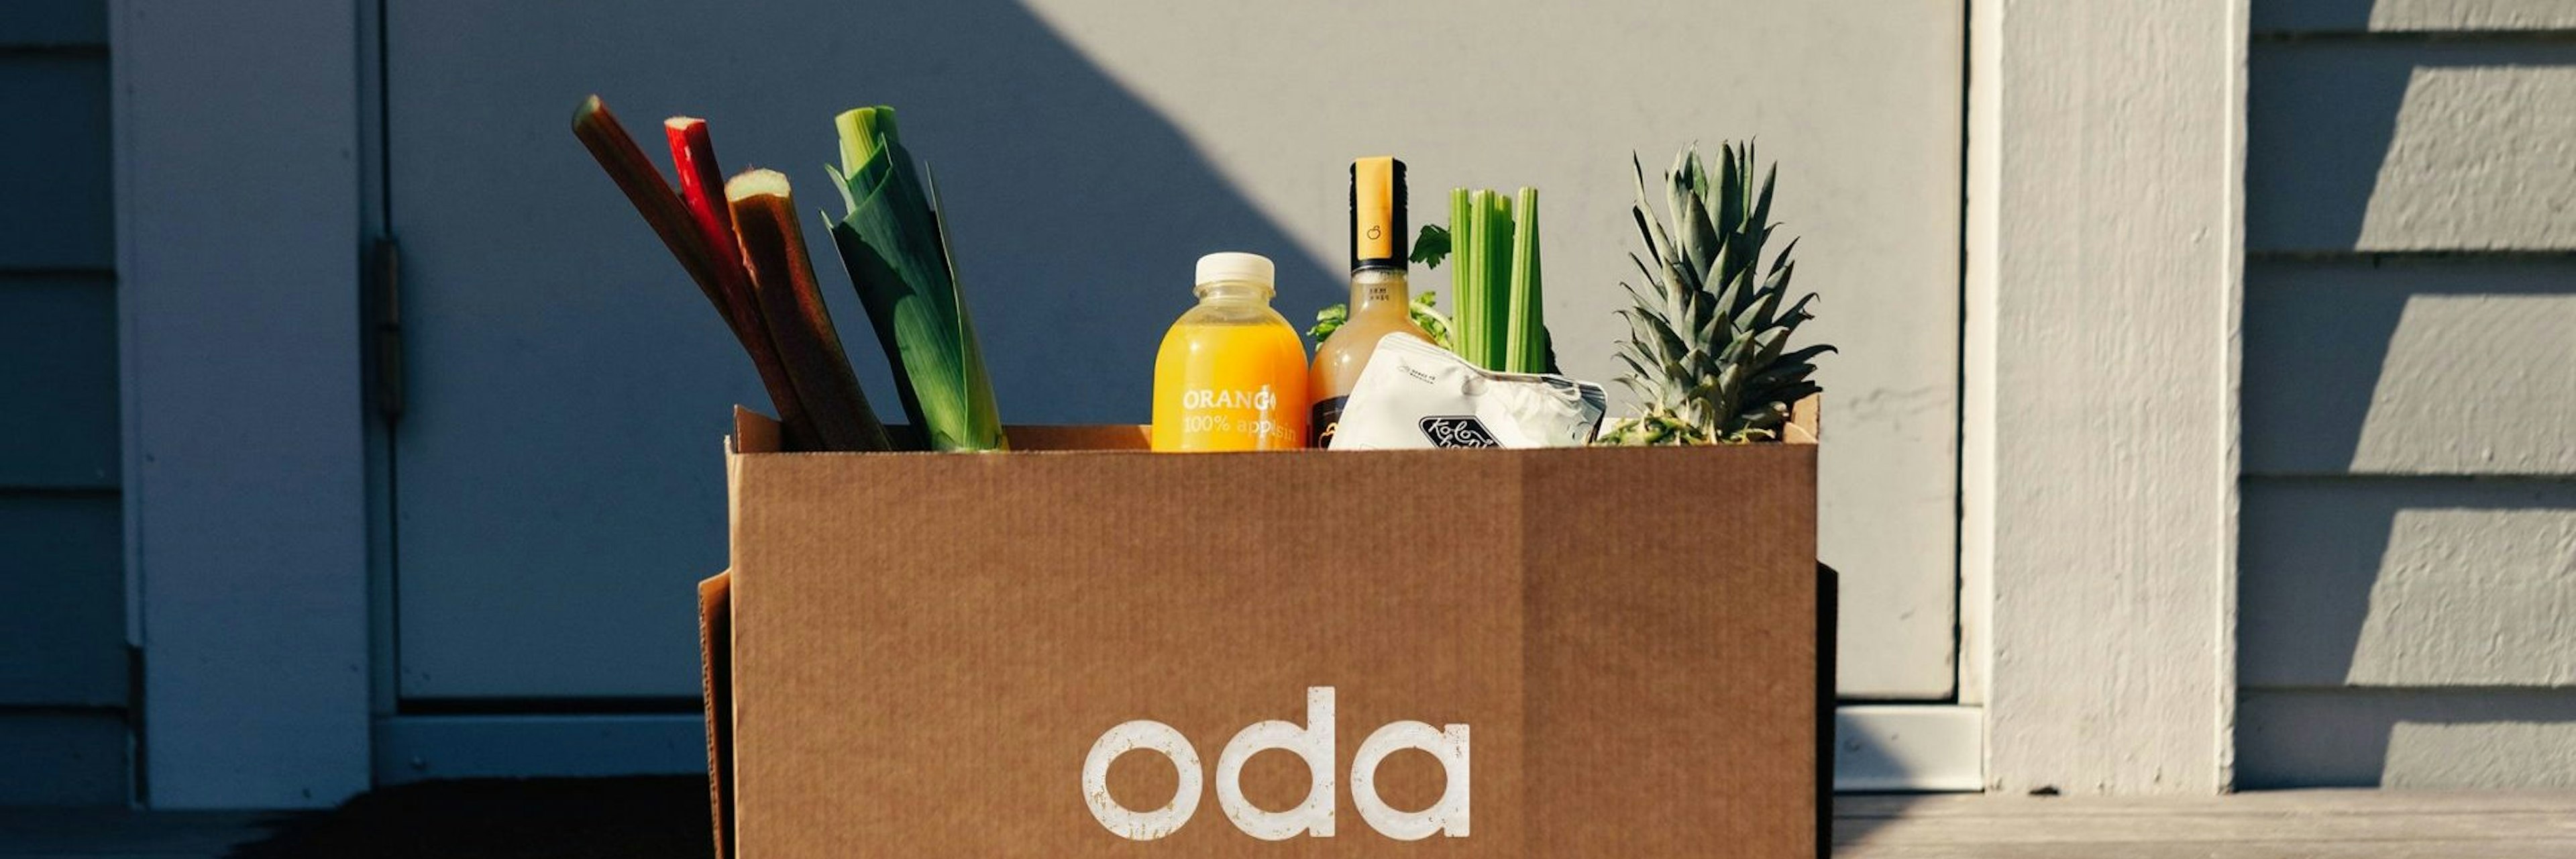 An image of a box branded by online grocer Oda.